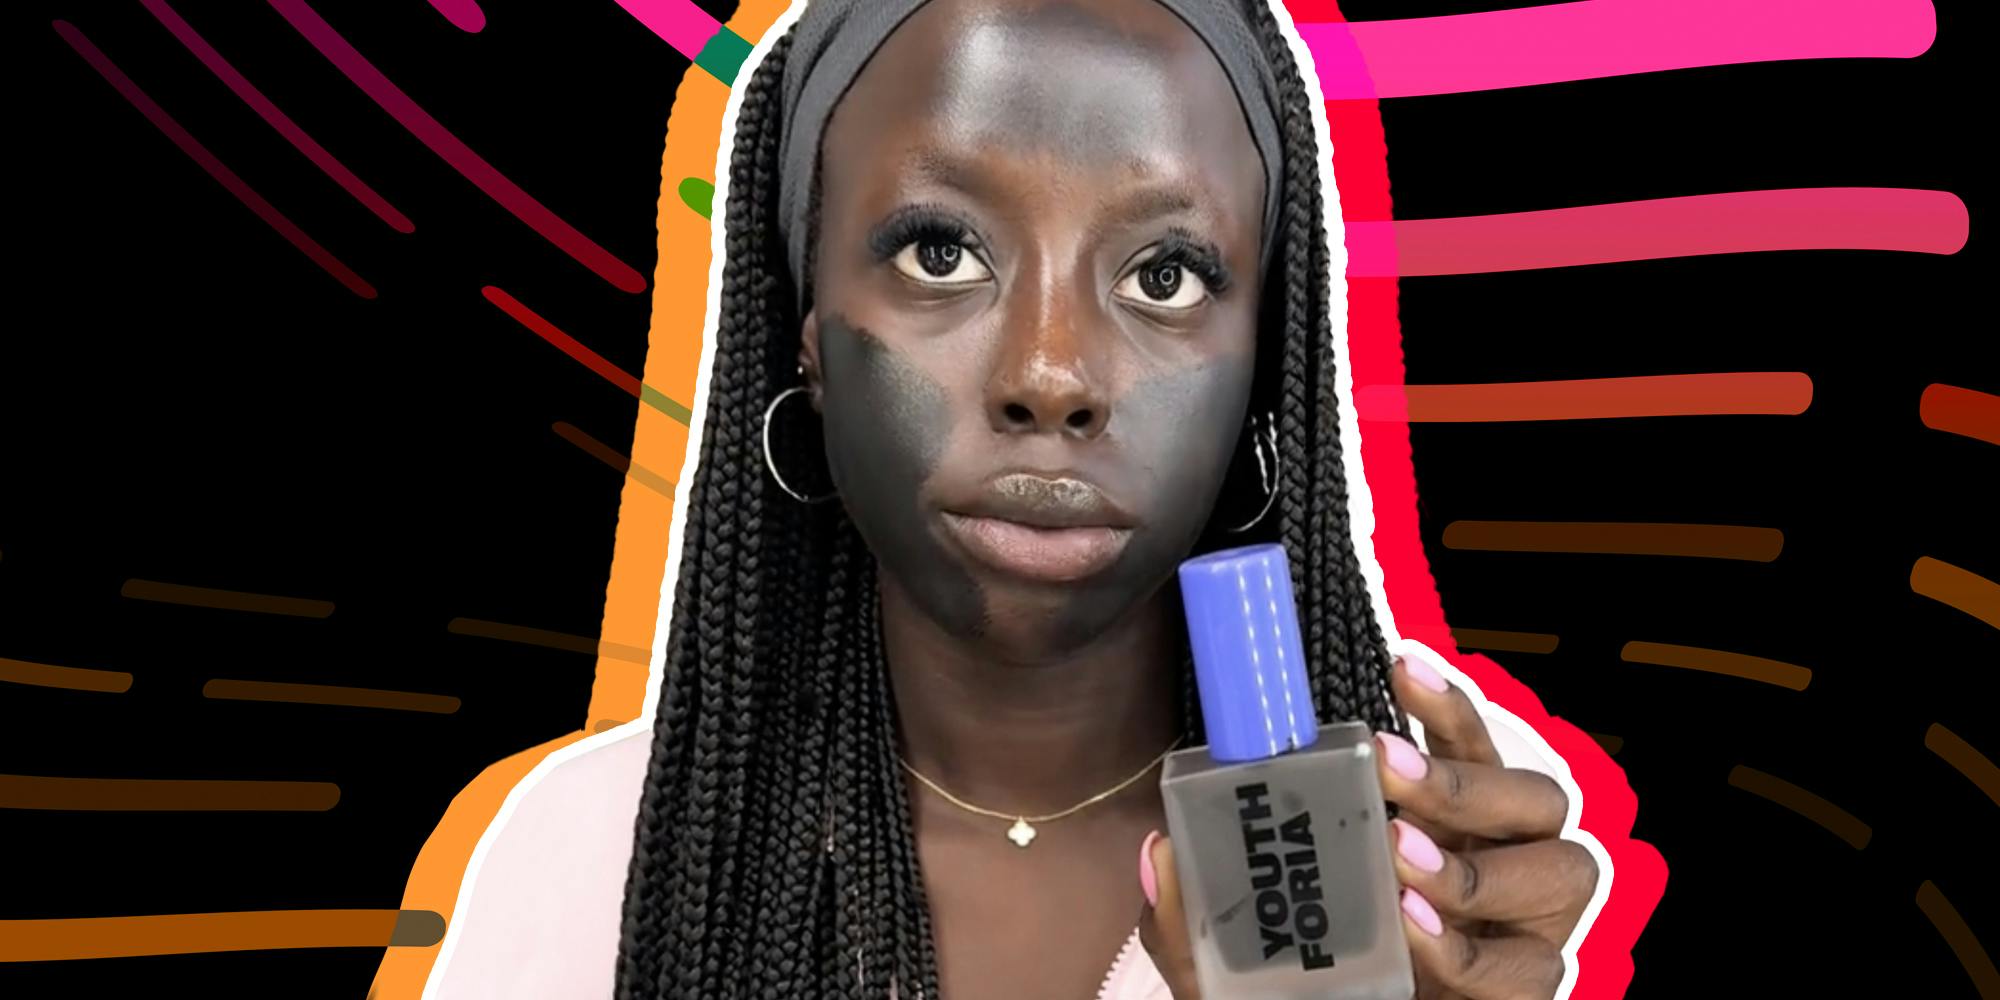 Youthforia Faces Controversy Over New Foundation Shade